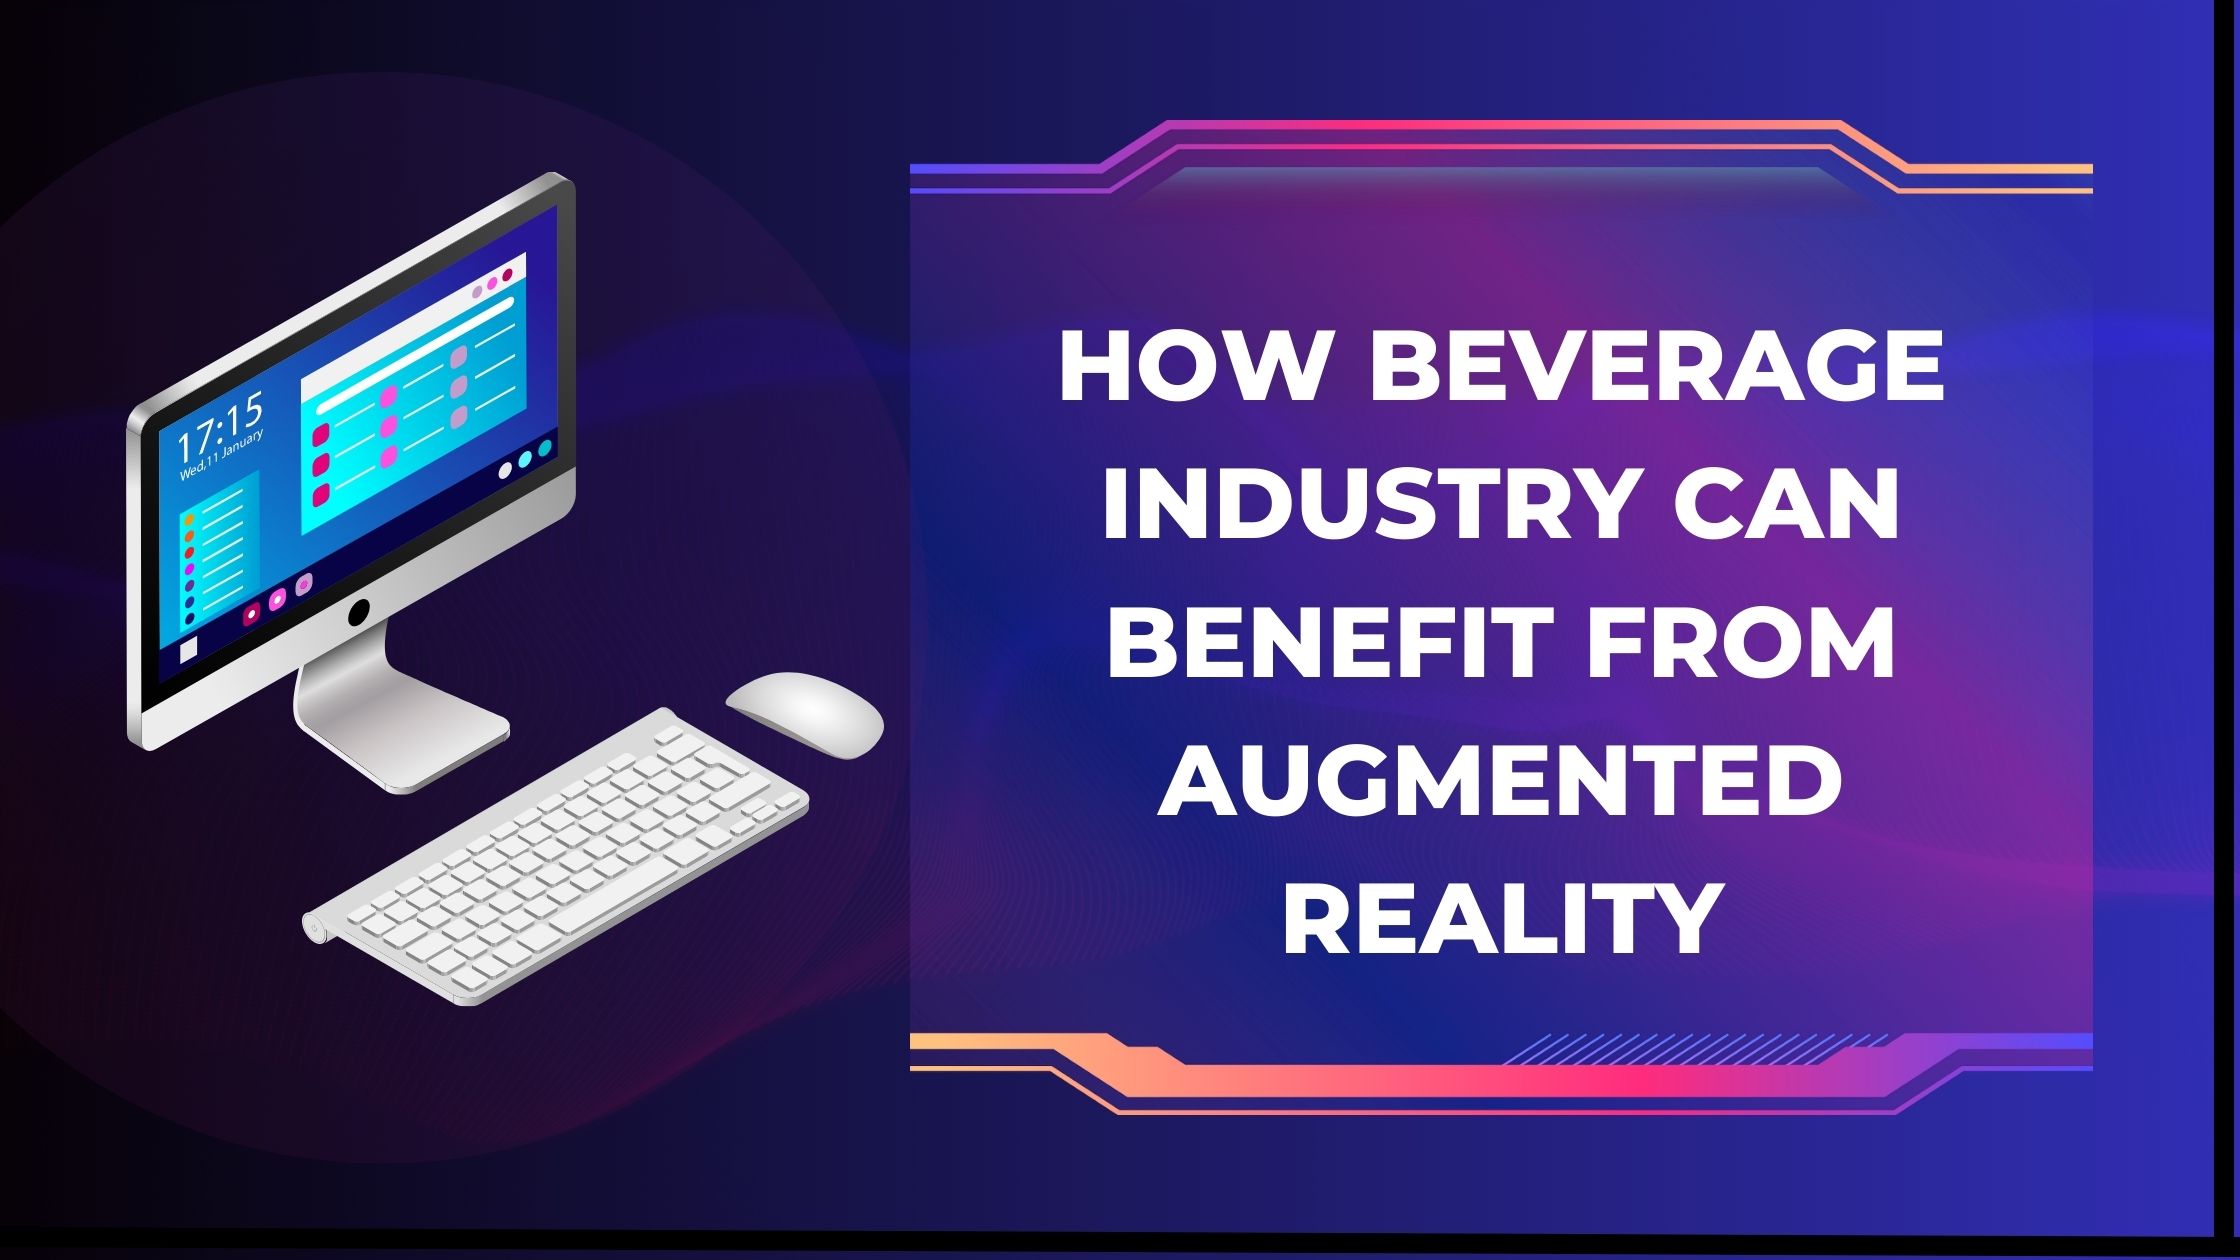 How Beverage Industry can benefit from Augmented Reality